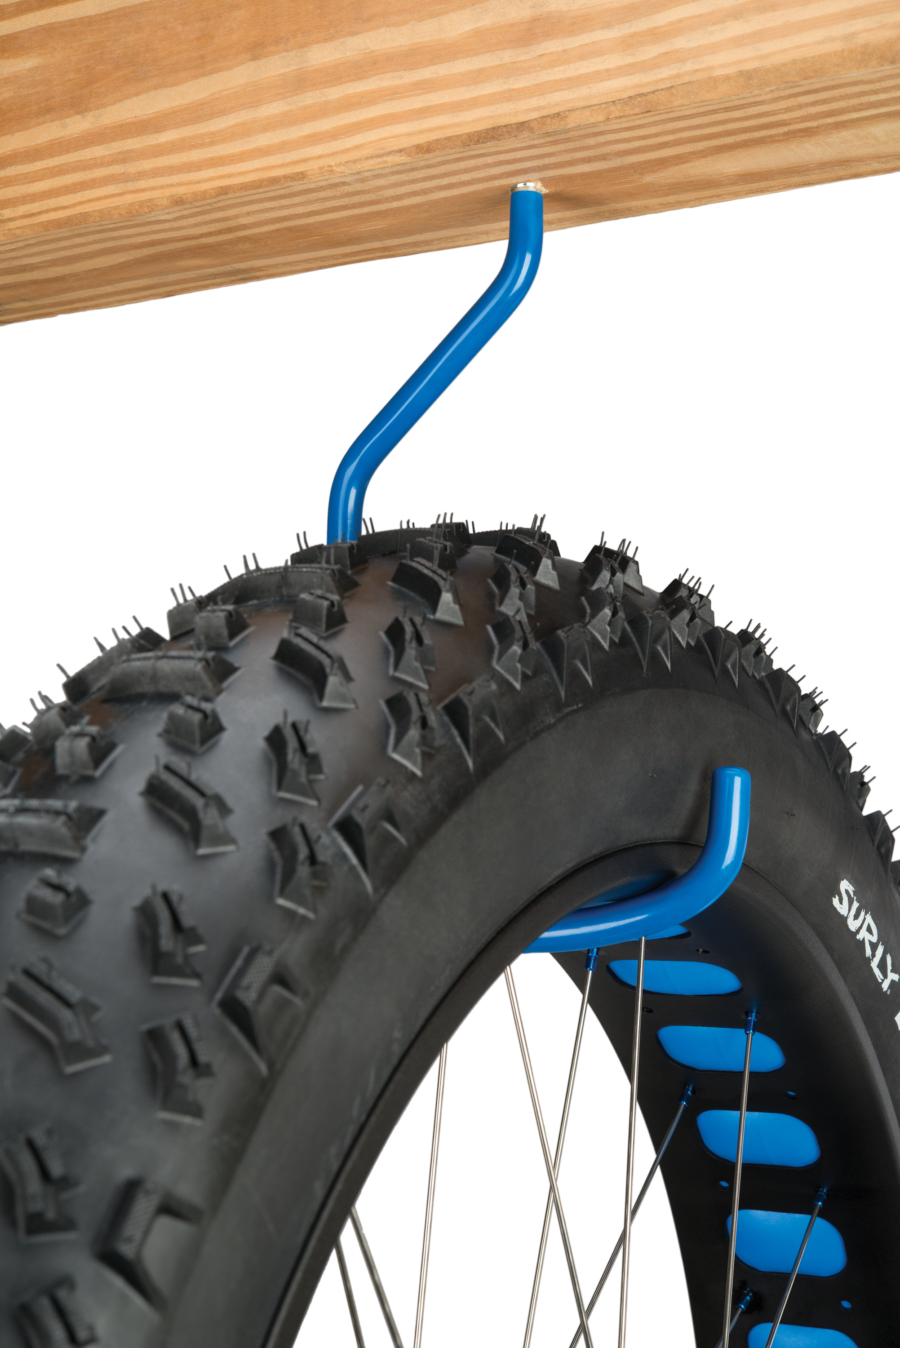 The Park Tool 471 Extra-Large Storage Hook — Wood Thread holding fat tire bike wheel, enlarged